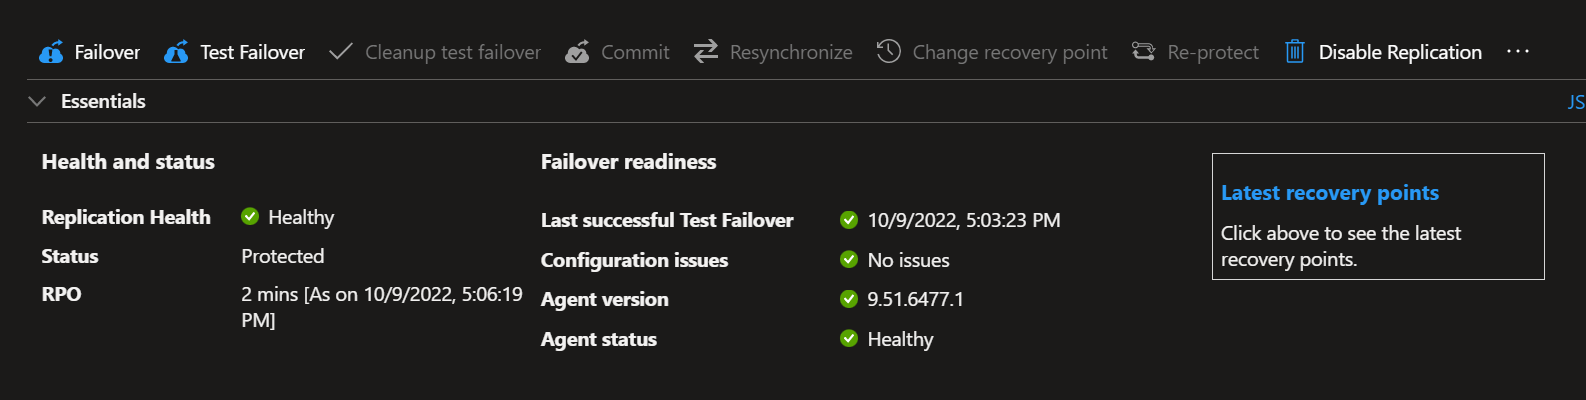 Azure shows the VM status as “Protected” and the last successful test failover